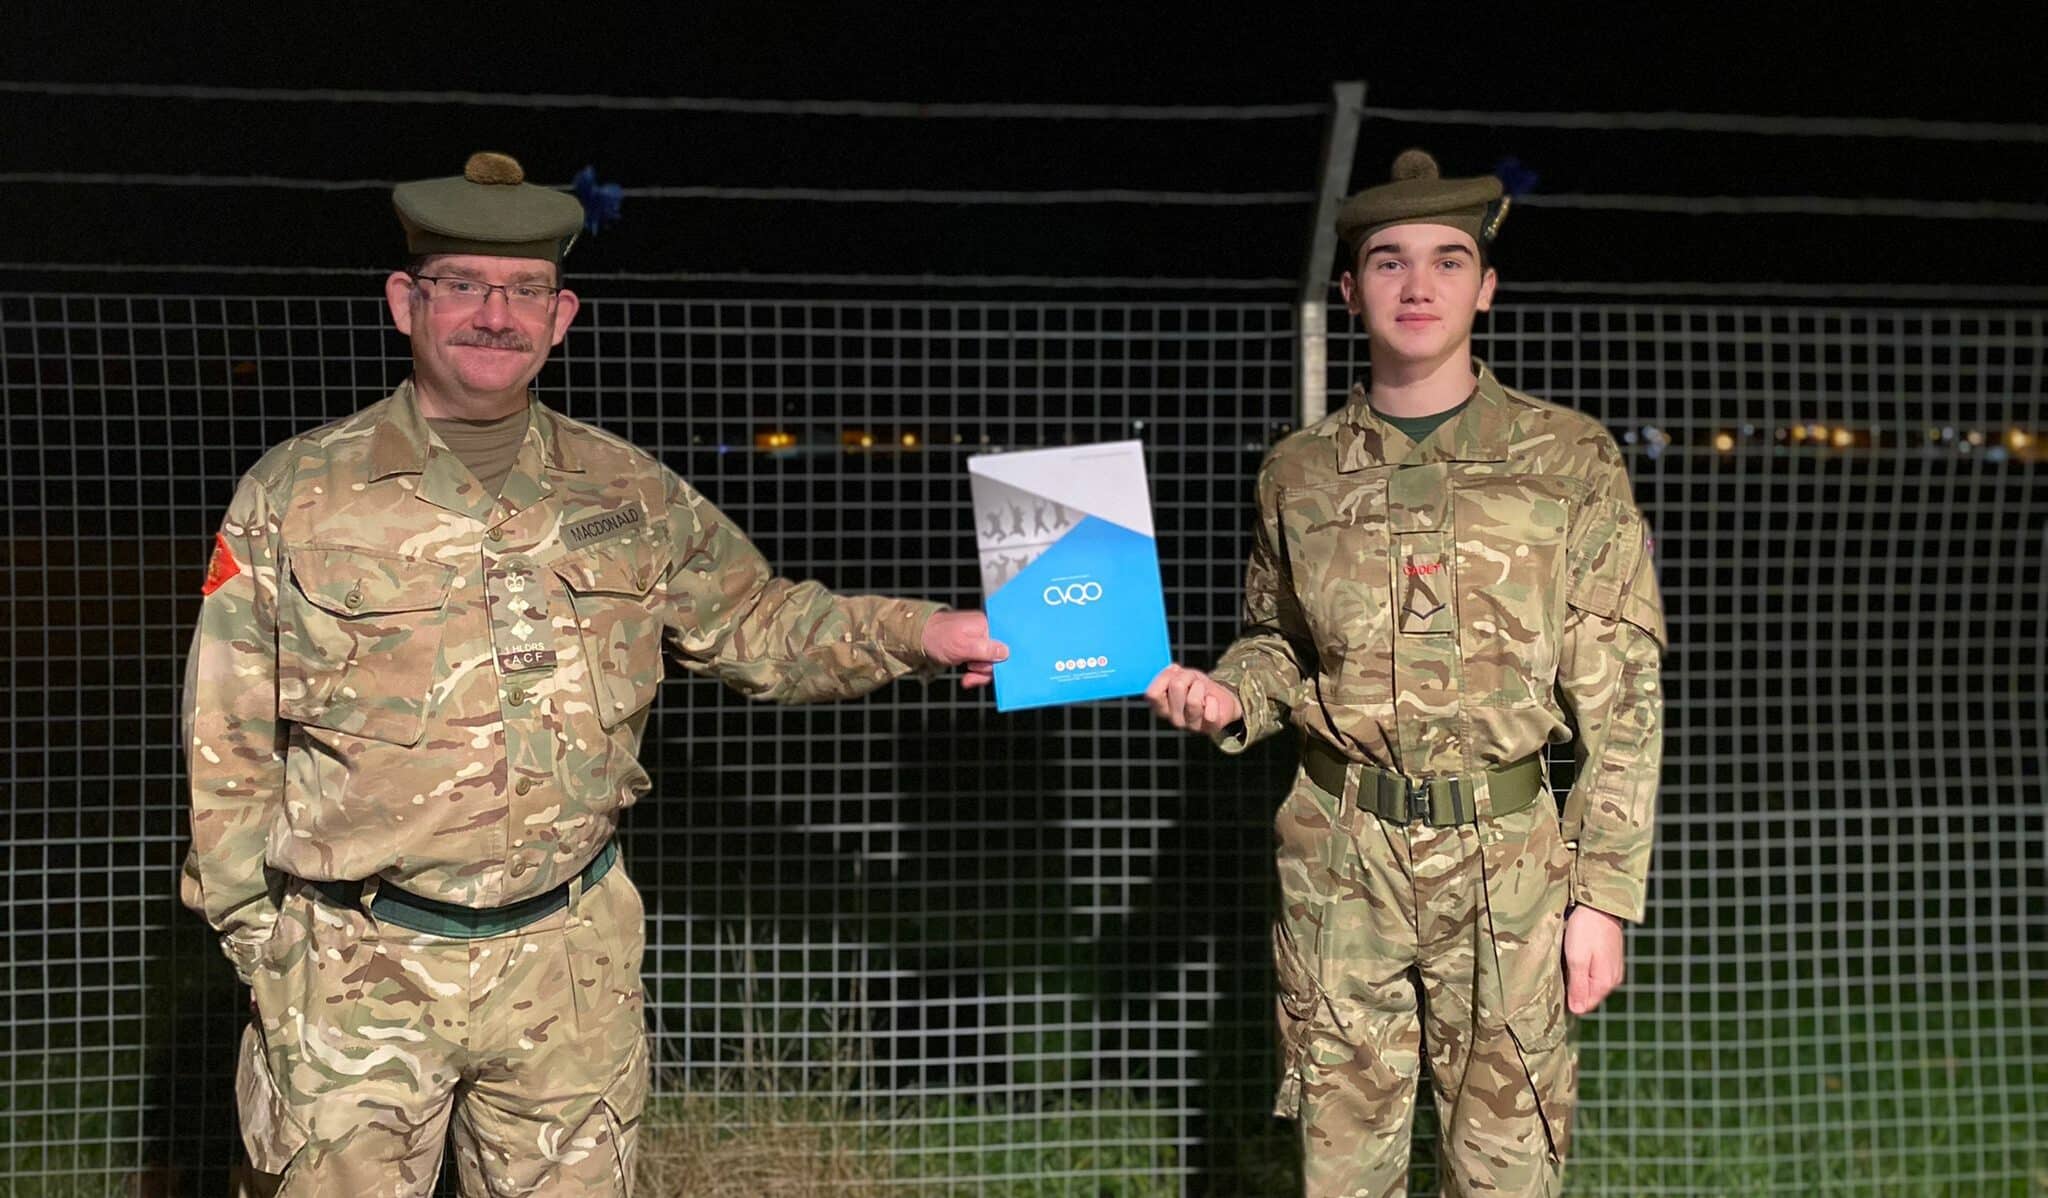 LCpl McLeod-Taylor was presented with his certificate on Tuesday evening by the Battalion’s Commandant Colonel Mike MacDonald.